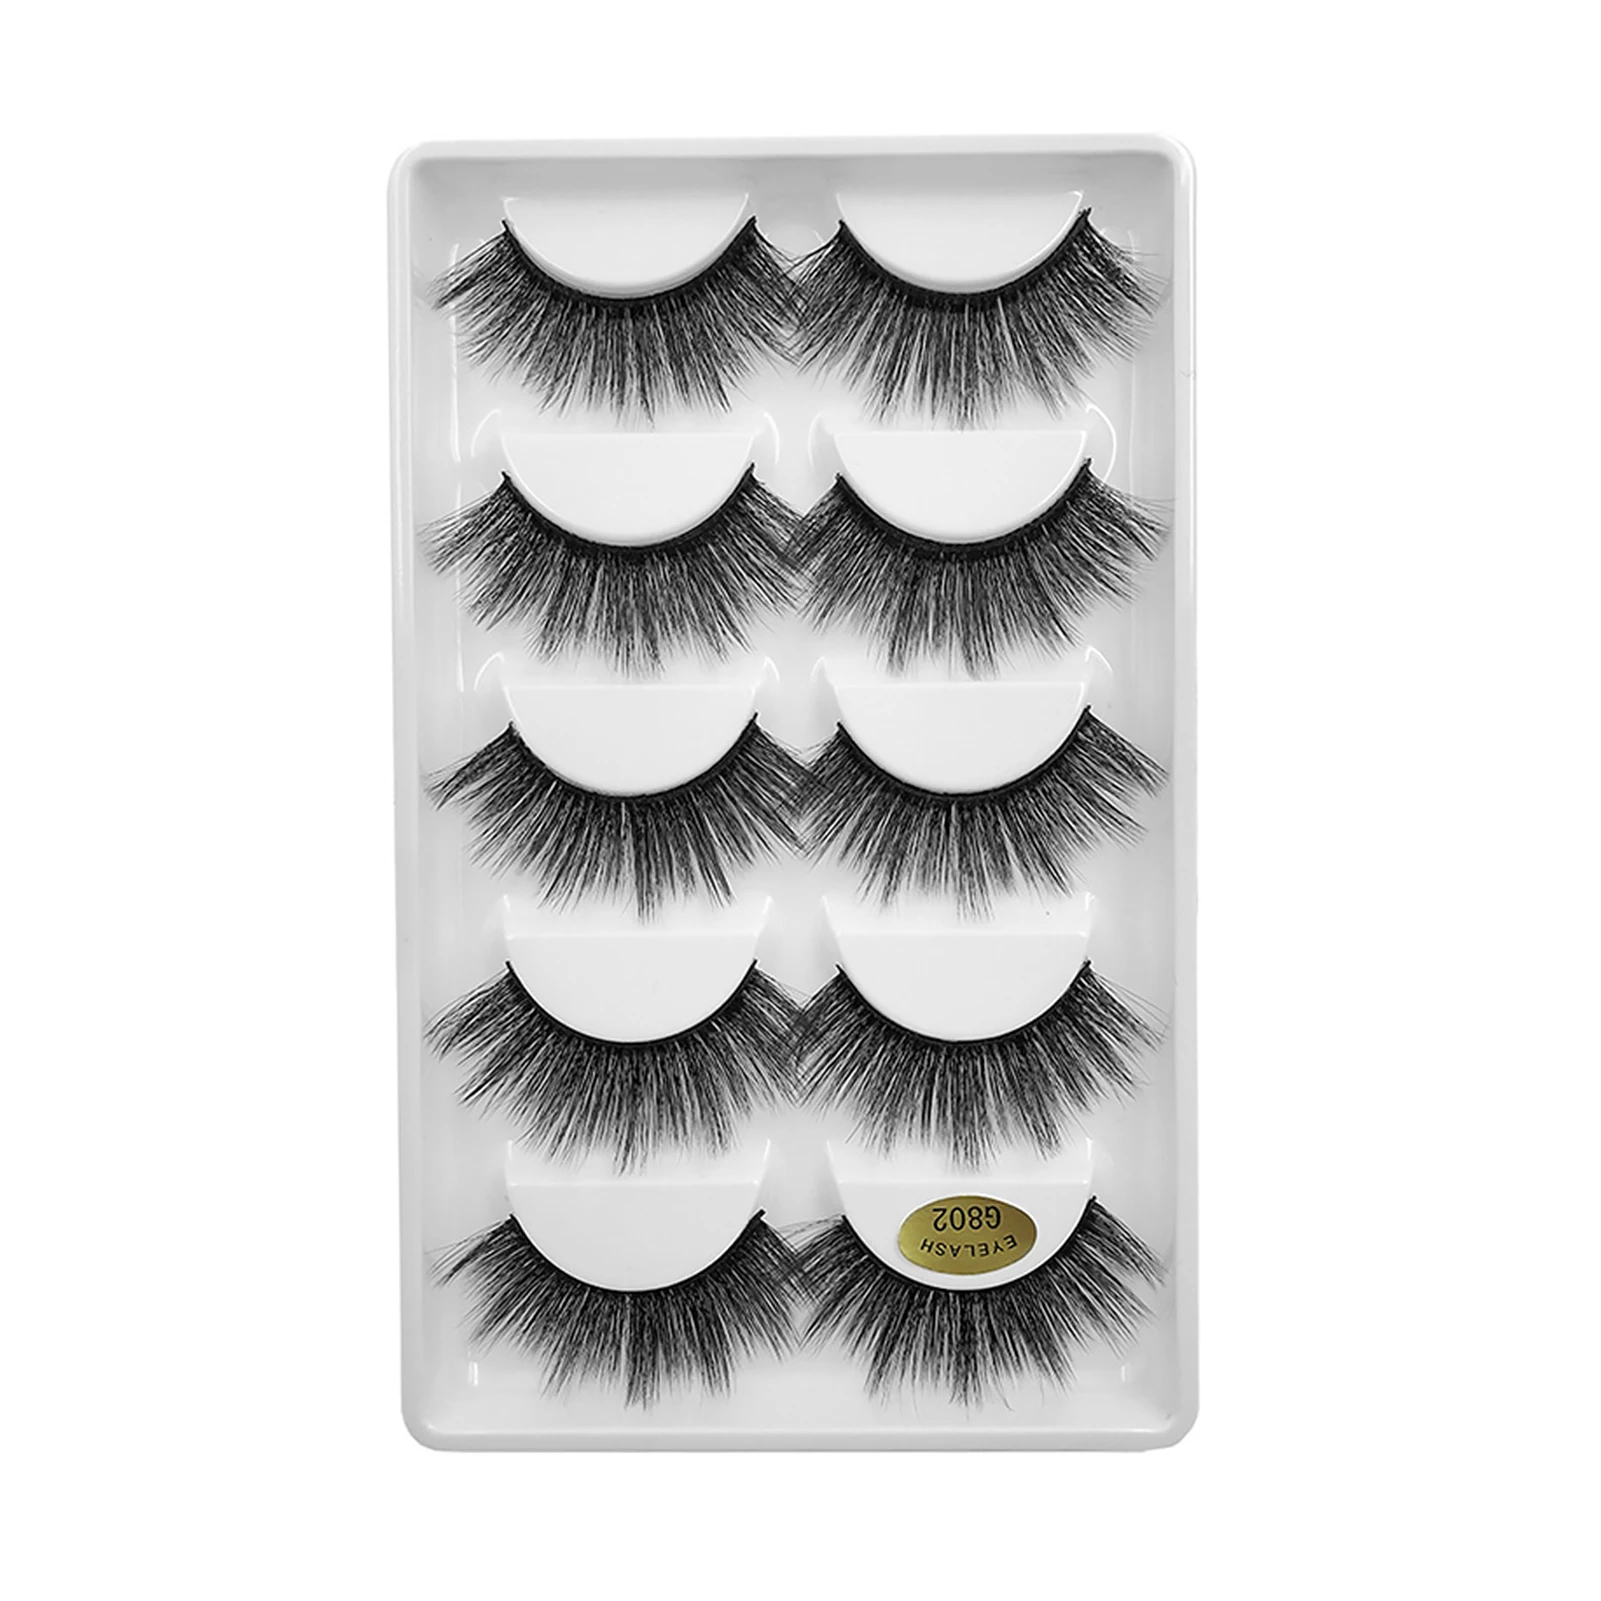 

5pairs Thick Party Soft Extension Artificial Mink 3D Natural Fake Lengthening Eye Makeup Fluffy Charming Wedding False Eyelashes